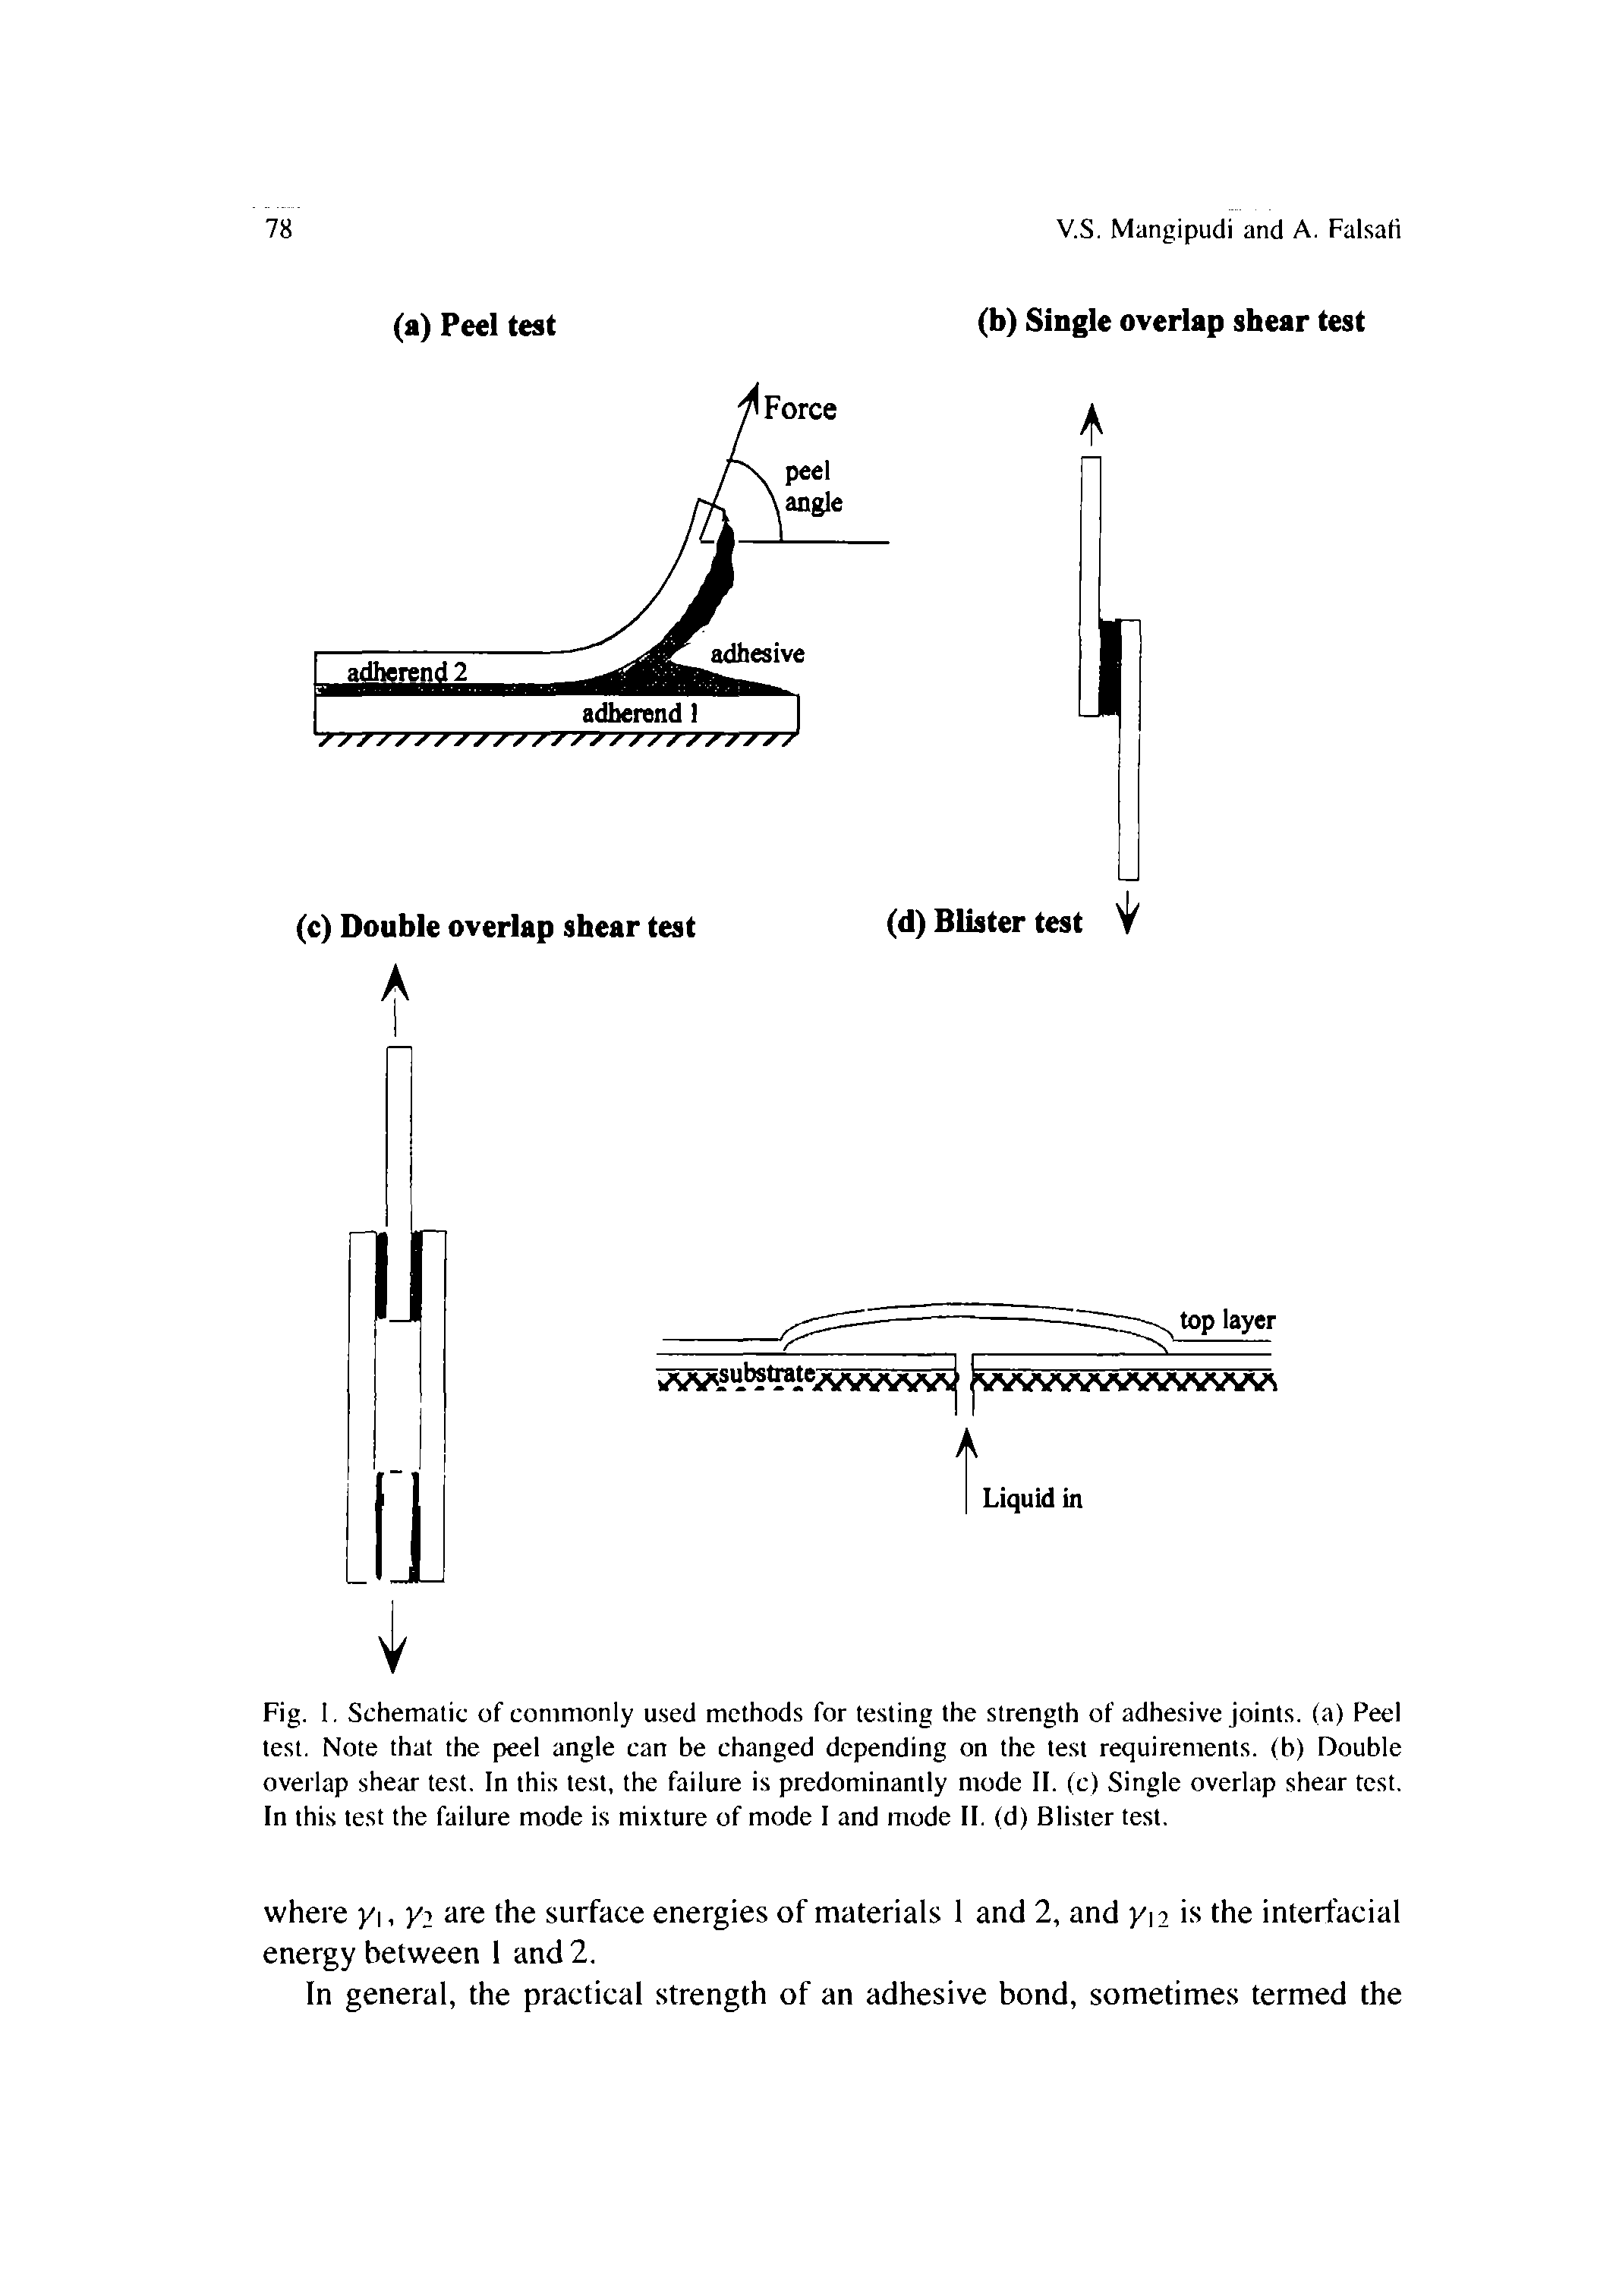 Fig. 1, Schematic of commonly u.sed methods for testing the strength of adhesive joints, (a) Peel test. Note that the peel angle can be changed depending on the test requirements, (b) Double overlap shear test. In this test, the failure is predominantly mode II. (c) Single overlap shear test. In this test the failure mode is mixture of mode I and mode II. (d) Blister test.